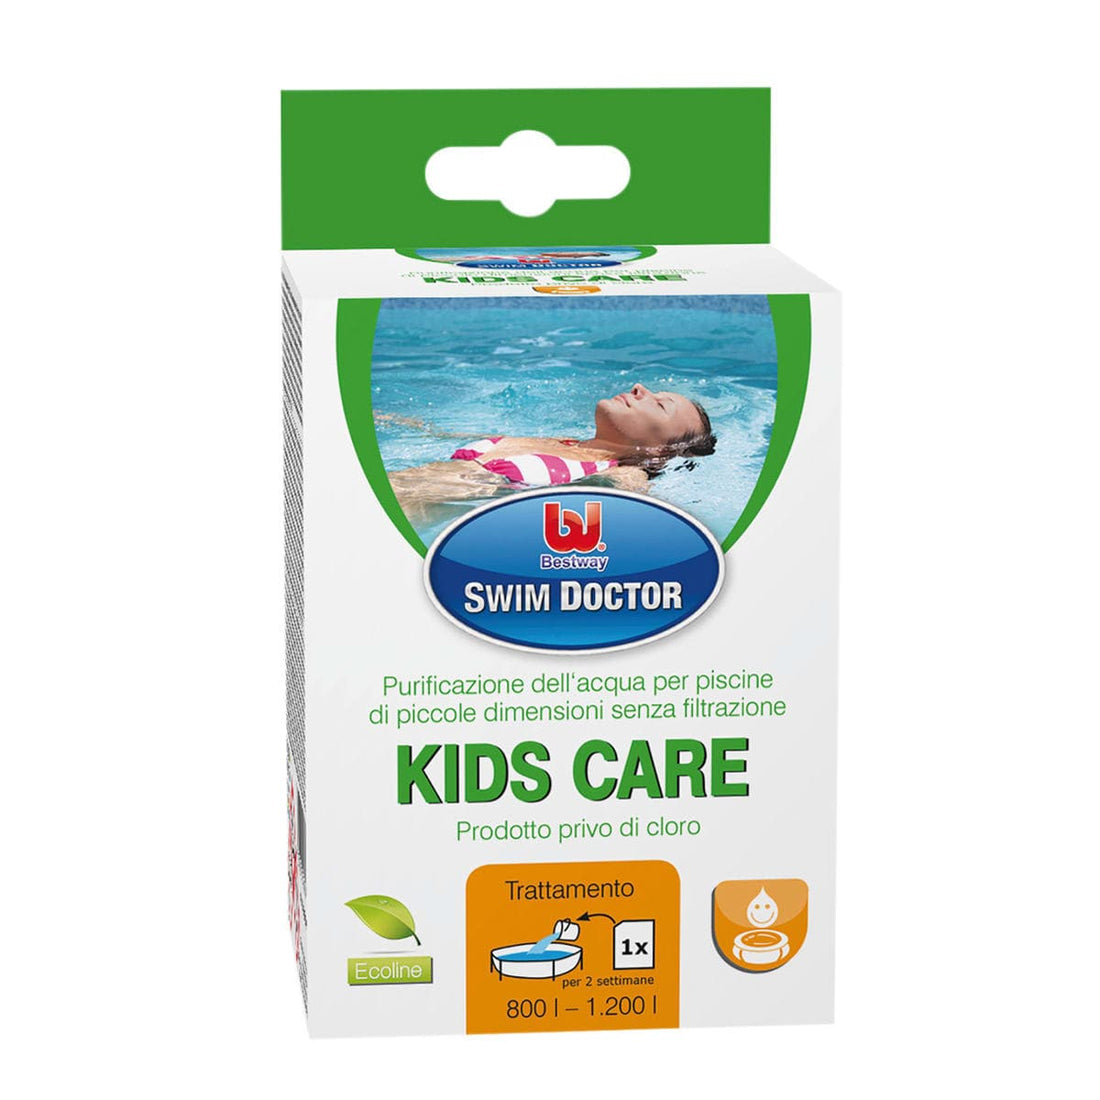 KIDS CARE PURIFIER SACHETS FOR SWIMMING POOLS 5X50ML - best price from Maltashopper.com BR500003124